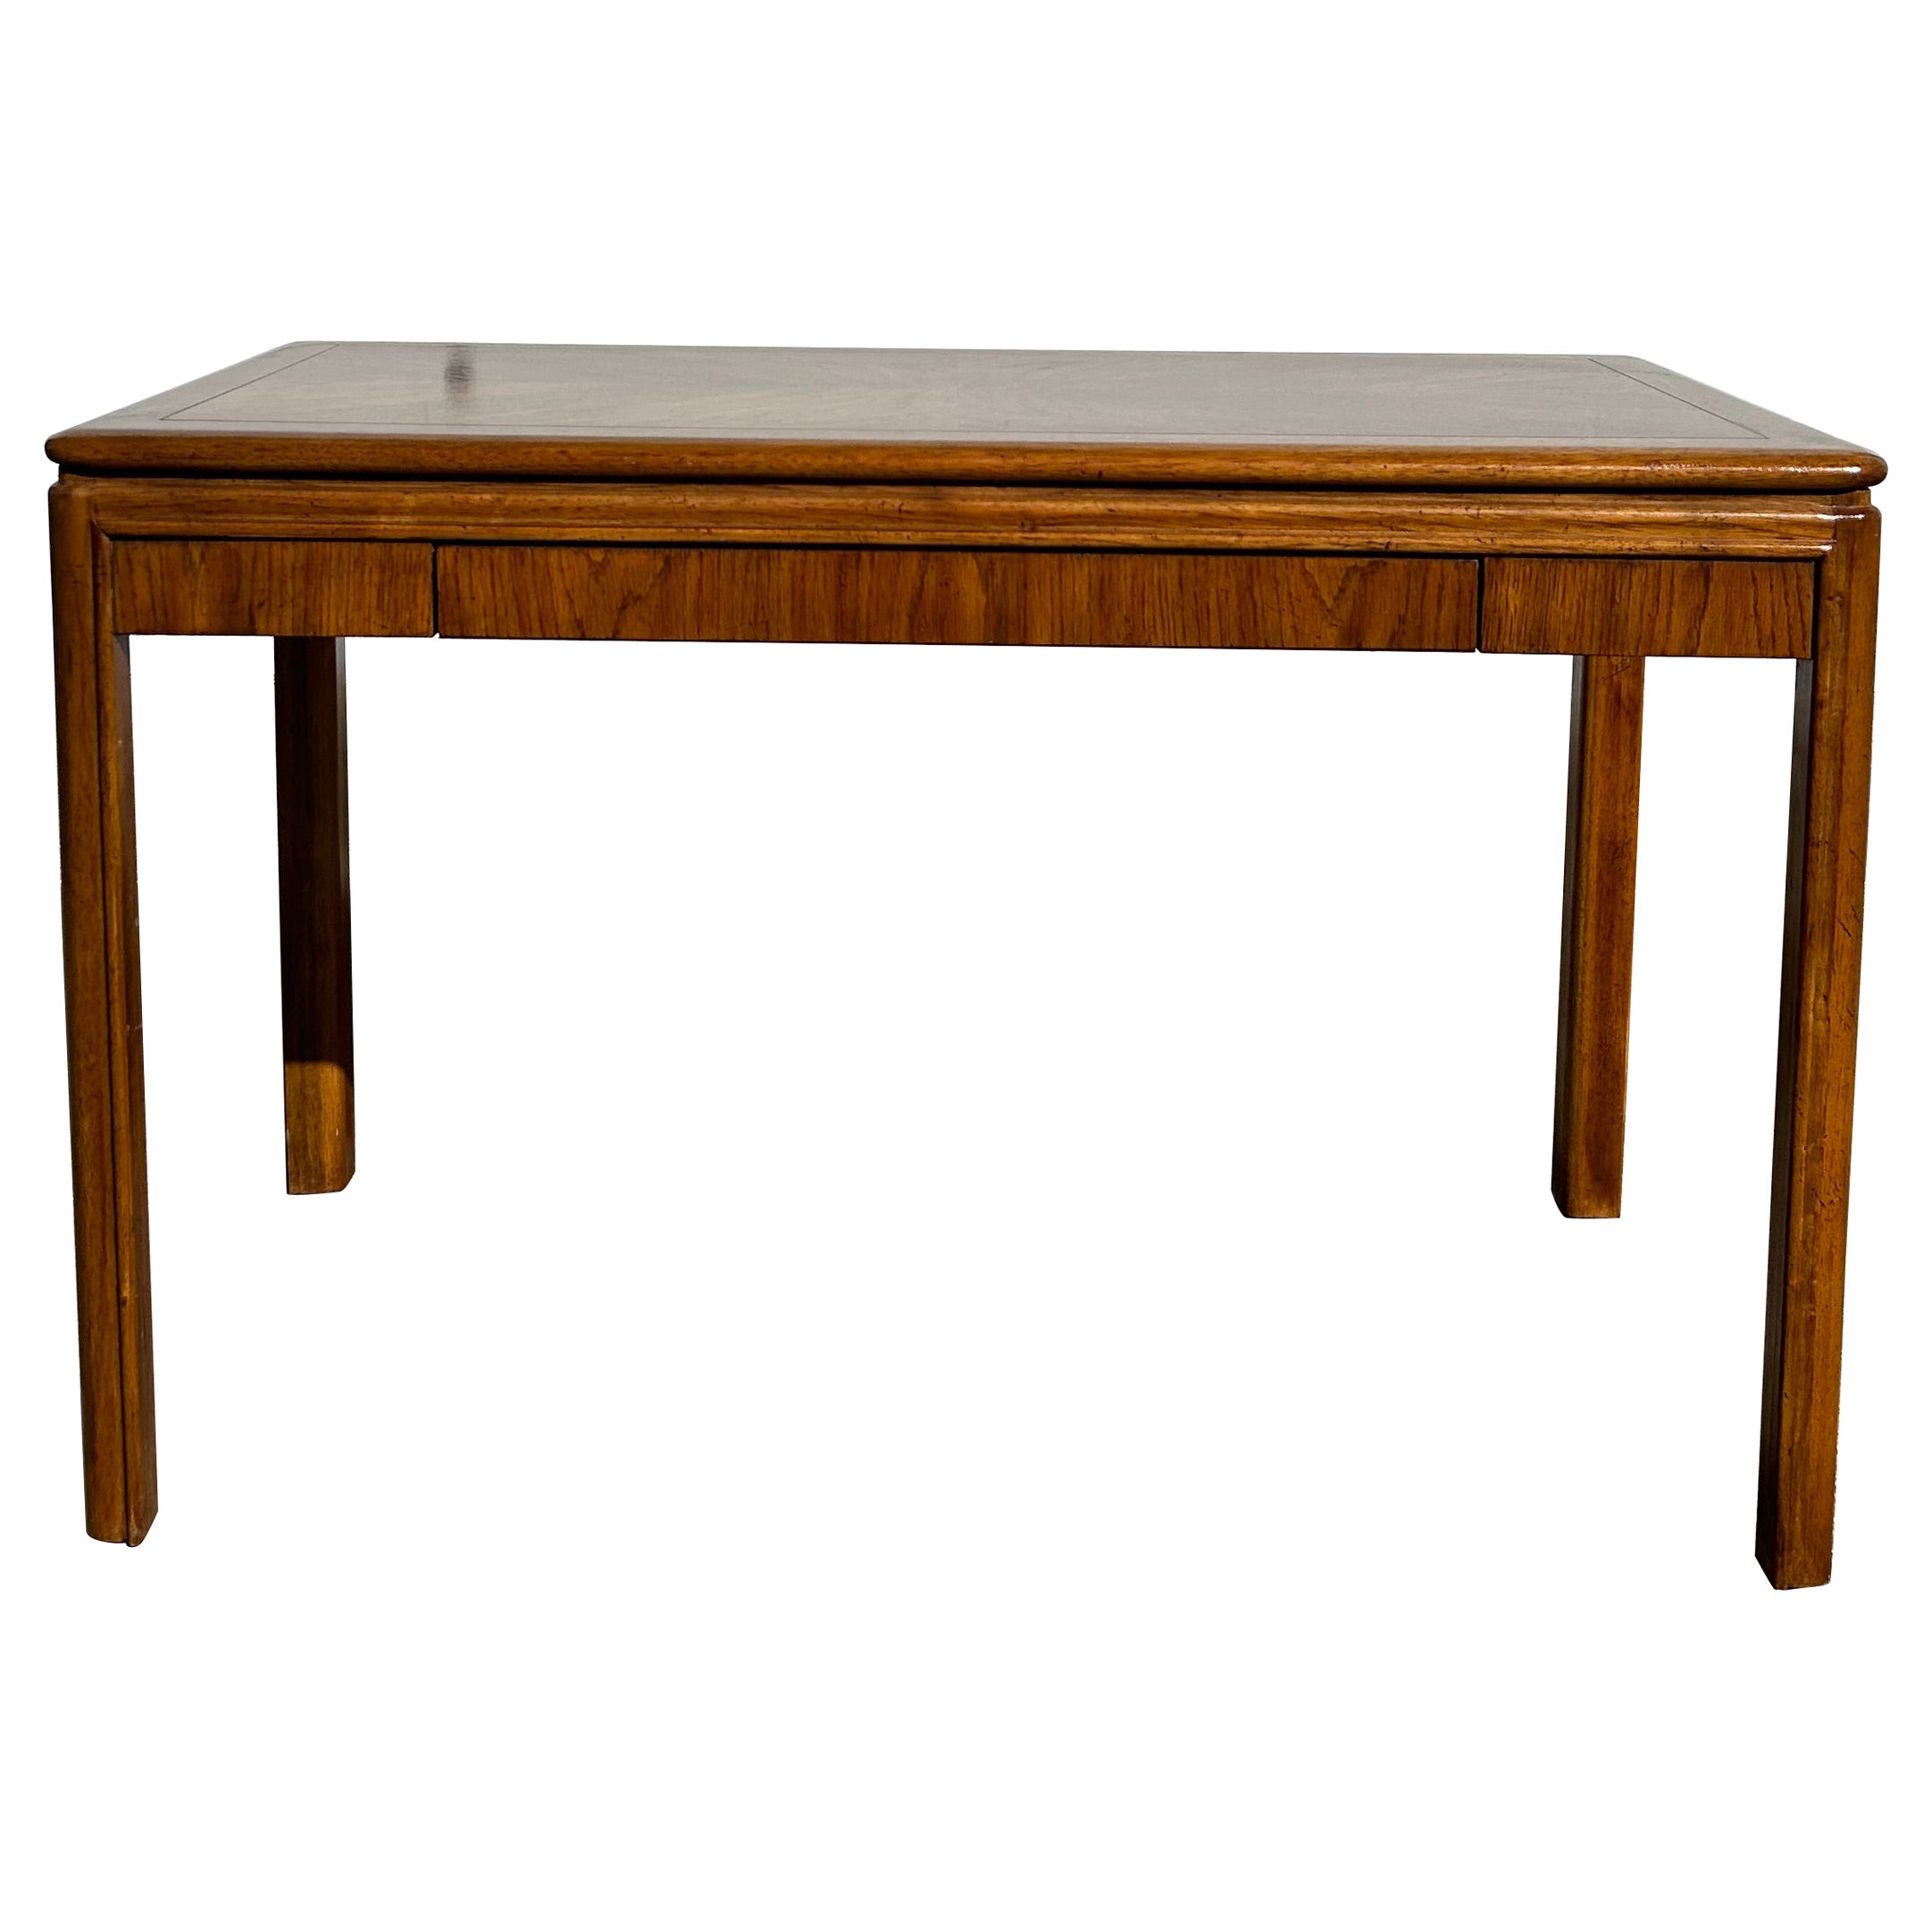 Beautiful Drexel Passage Writing Table or Desk with Drawer